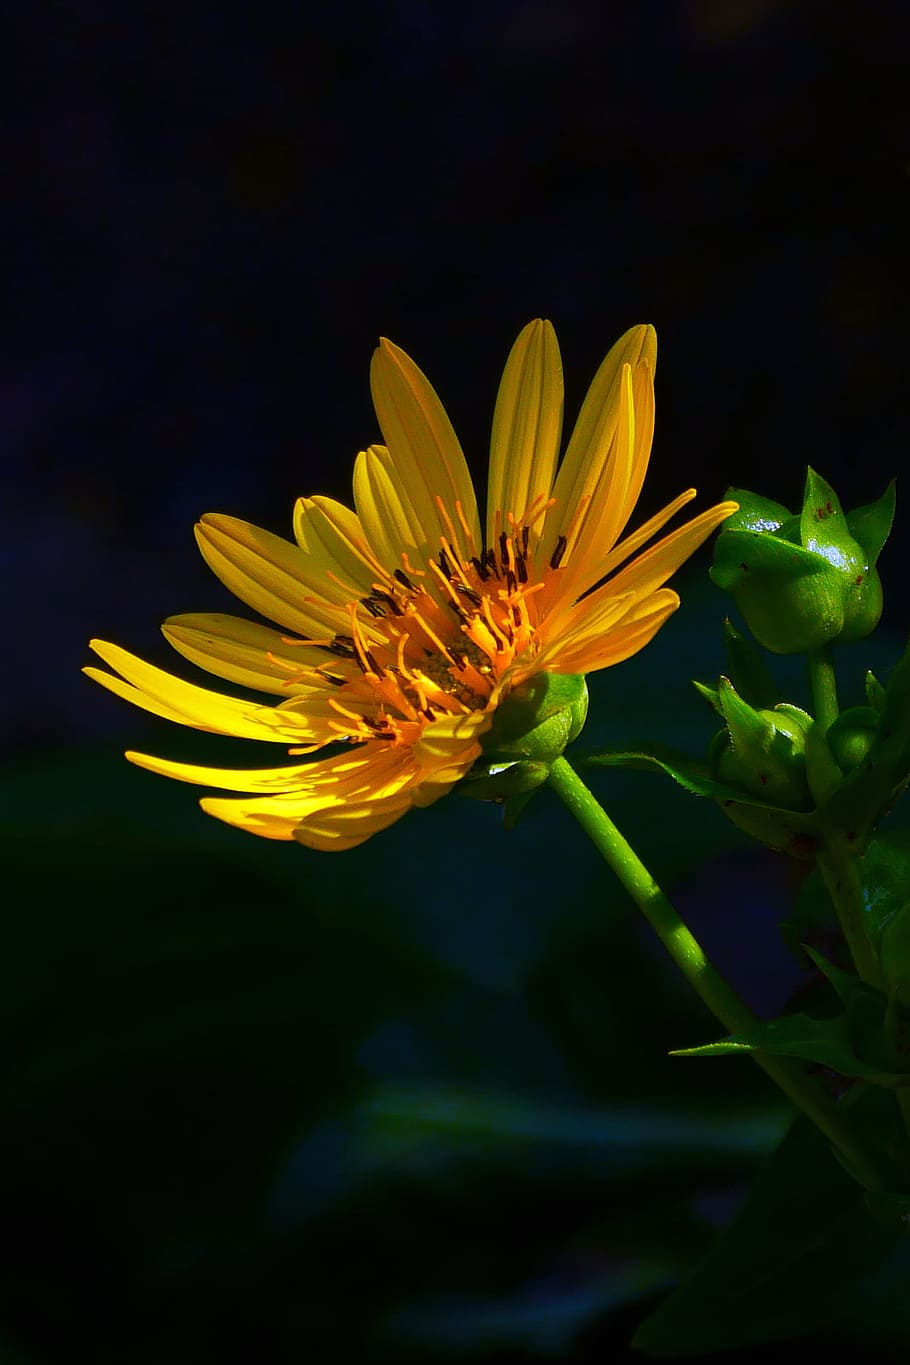 Golden Aster flower bathed in partial sunlight while in shade.